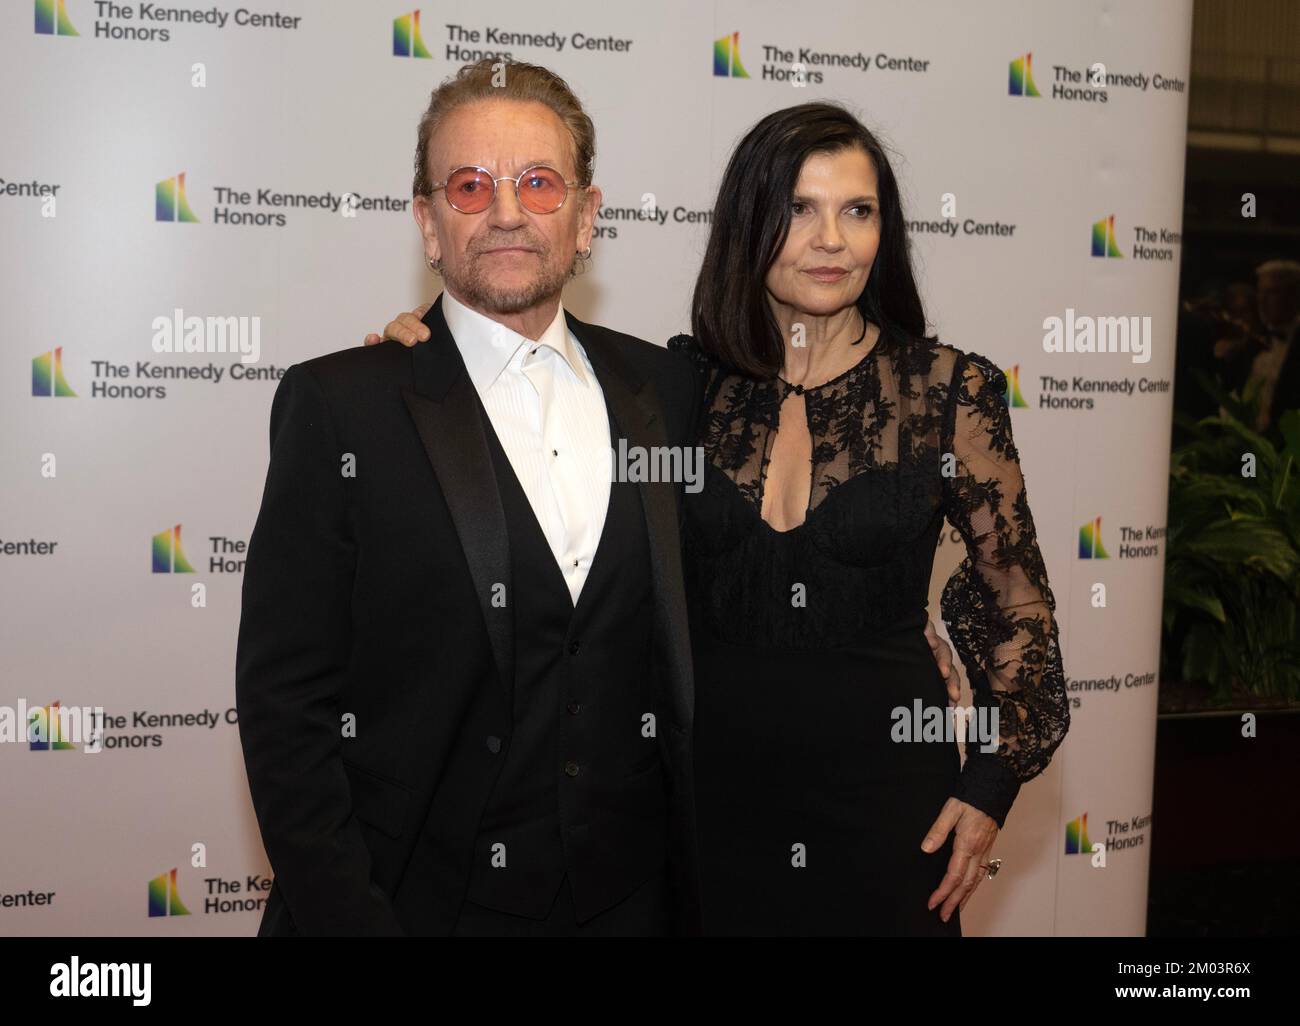 Washington DC, USA. 03rd Dec, 2022. Bono and his wife, Ali Hewson, arrive for the formal Artist's Dinner honoring the recipients of the 45th Annual Kennedy Center Honors at the Department of State in Washington, DC on Saturday, December 3, 2022. The 2022 honorees are: actor and filmmaker George Clooney; contemporary Christian and pop singer-songwriter Amy Grant; legendary singer of soul, Gospel, R&B, and pop Gladys Knight; Cuban-born American composer, conductor, and educator Tania León; and iconic Irish rock band U2, comprised of band members Bono, The Edge, Adam Clayton, and Larry Mullen Jr. Stock Photo